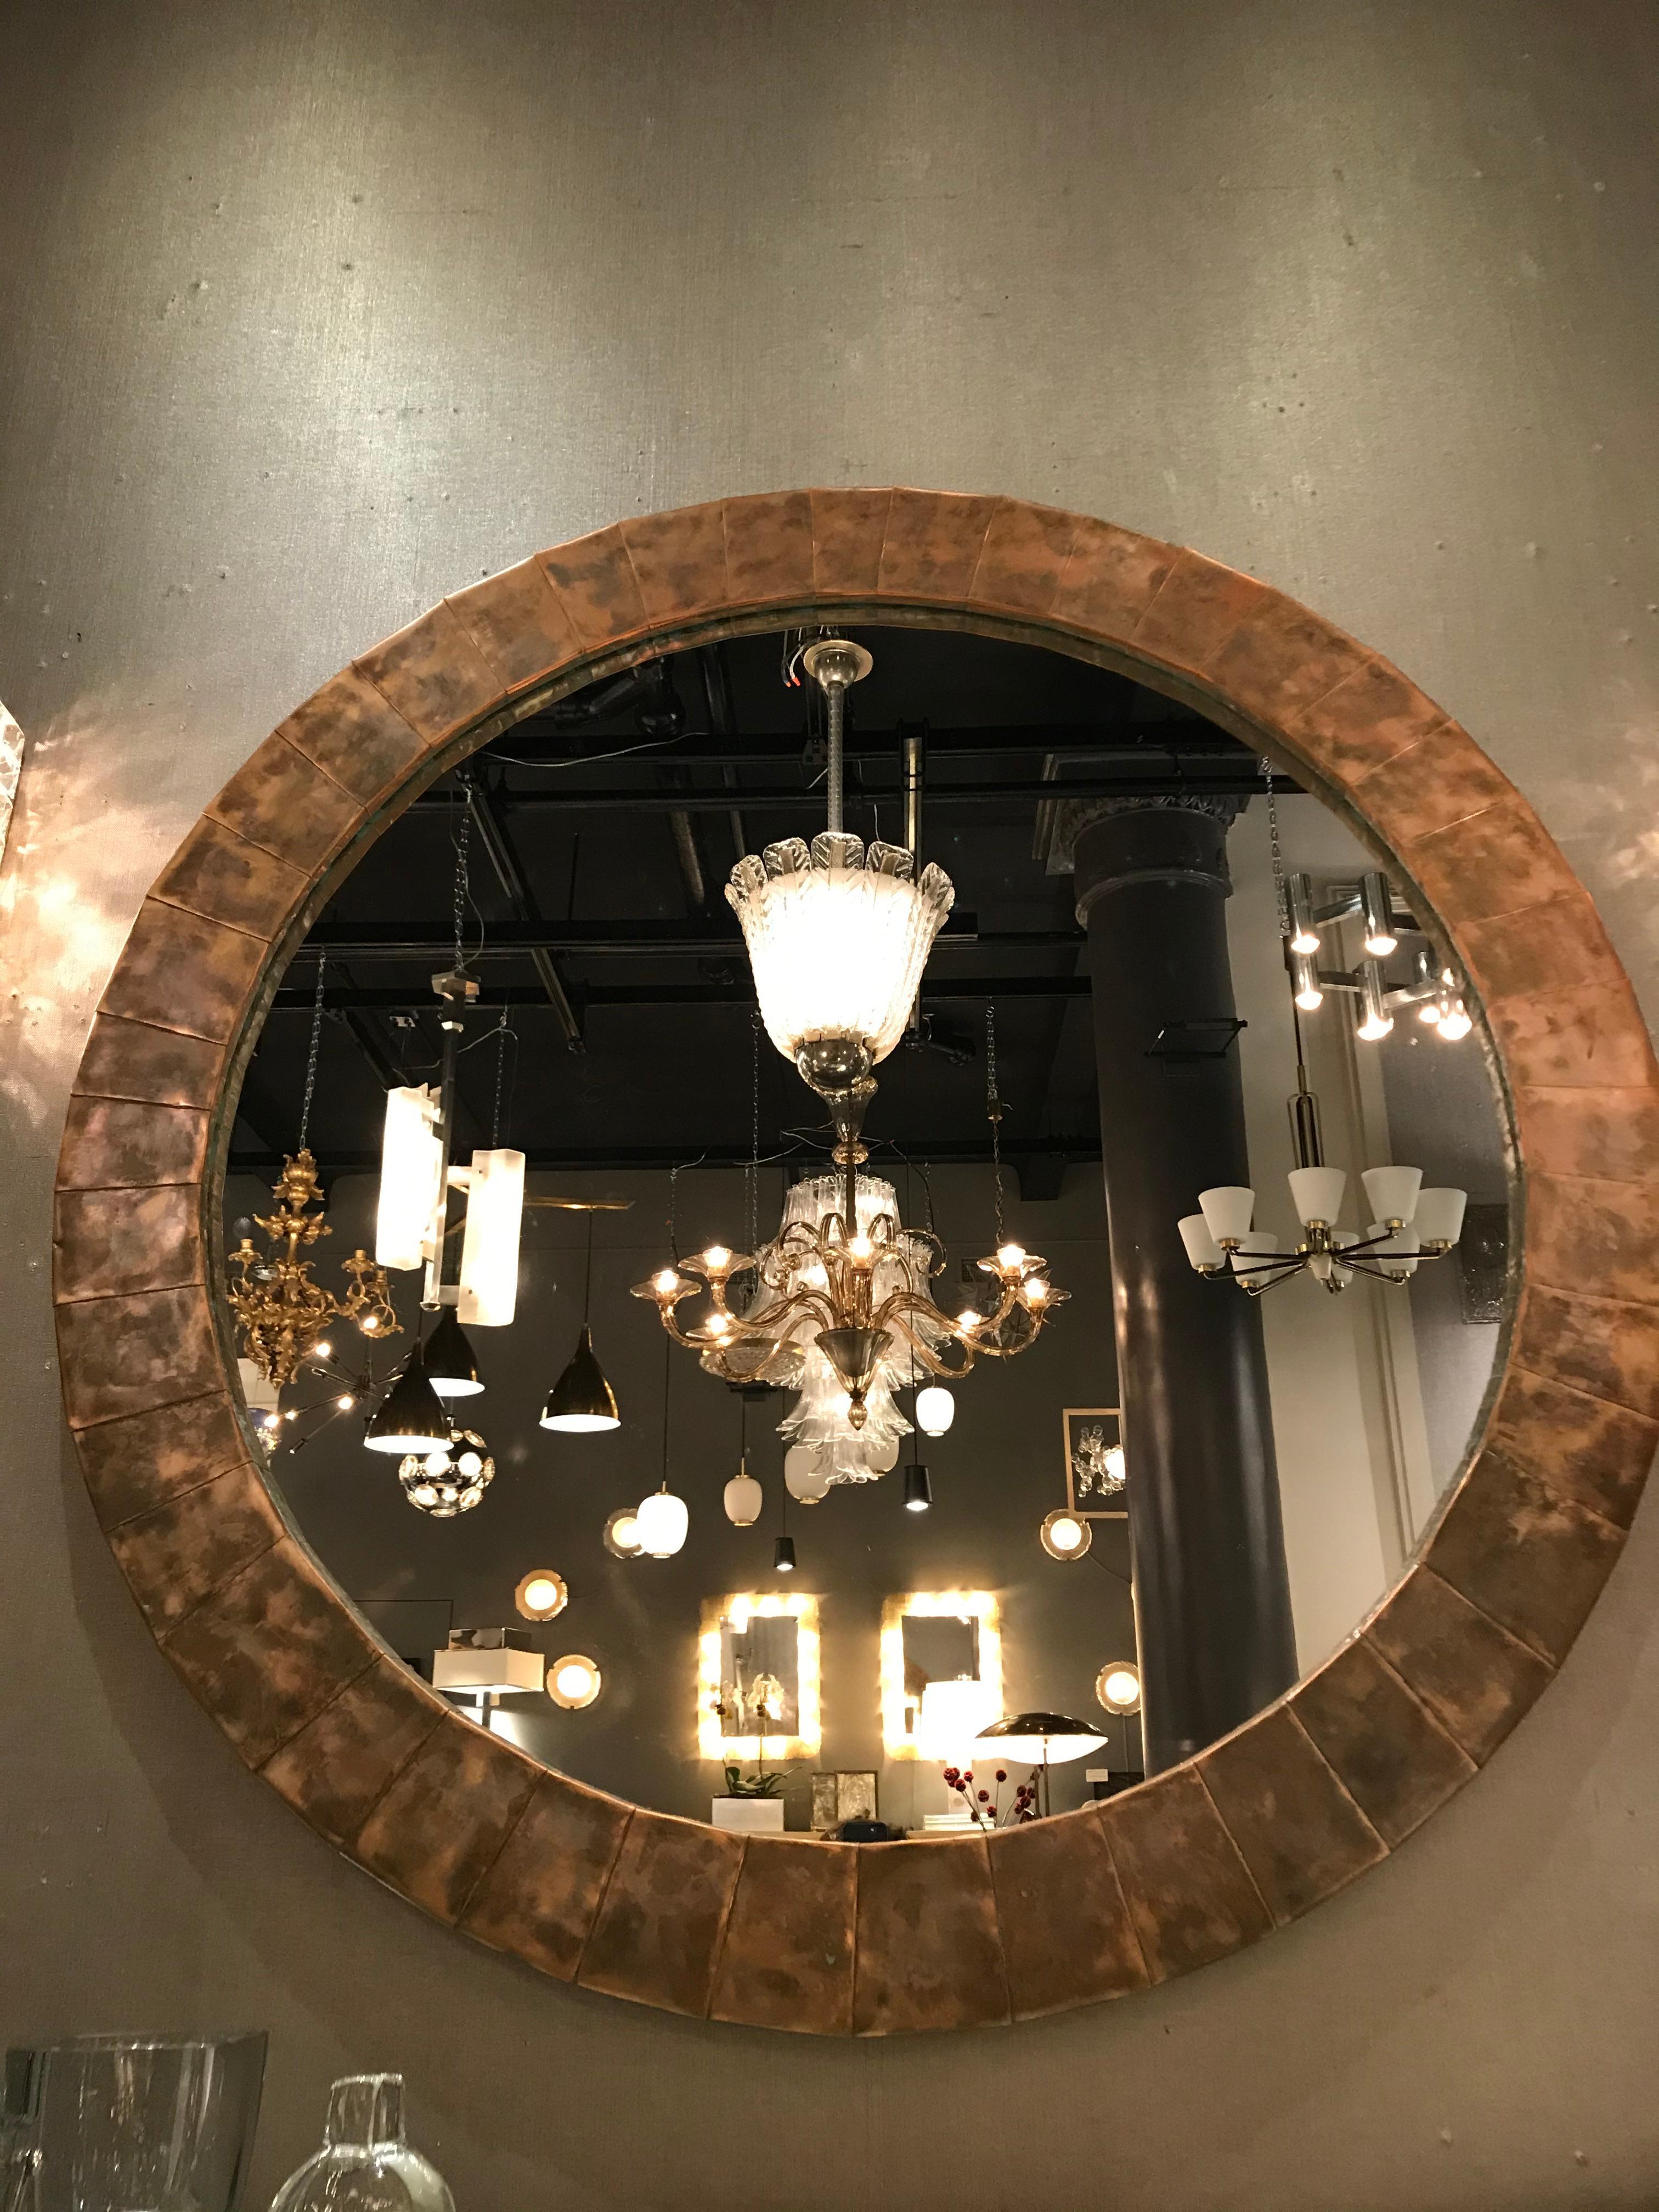 Oversized circular mirror surrounded by a naturally patinated copper frame.
  